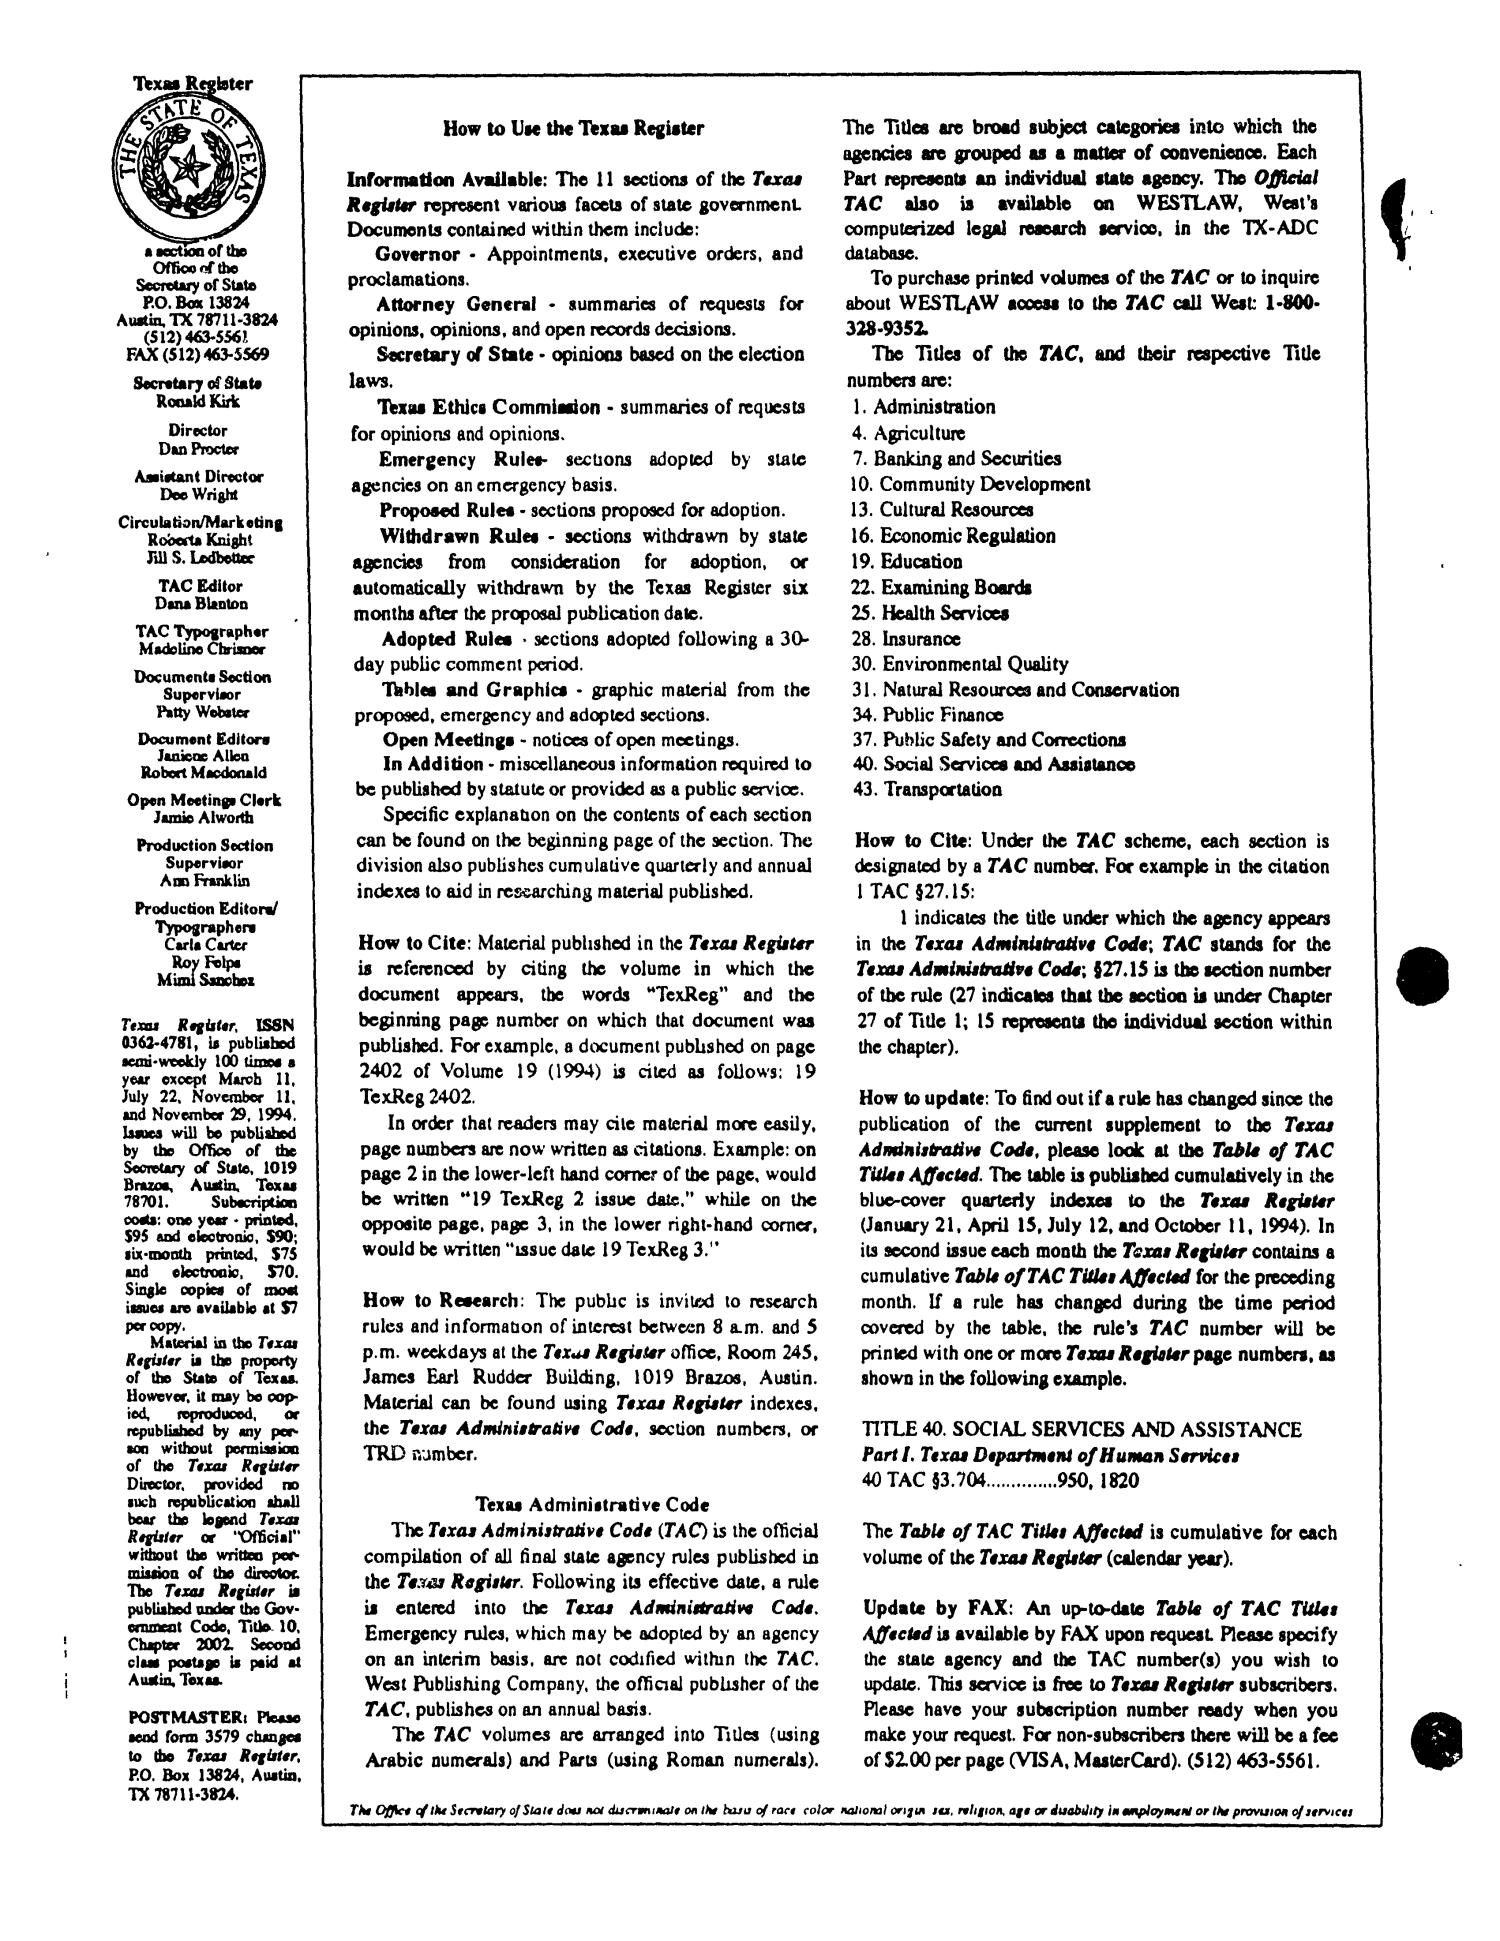 Texas Register, Volume 19, Number 66, Pages 6947-7028, September 6, 1994
                                                
                                                    None
                                                